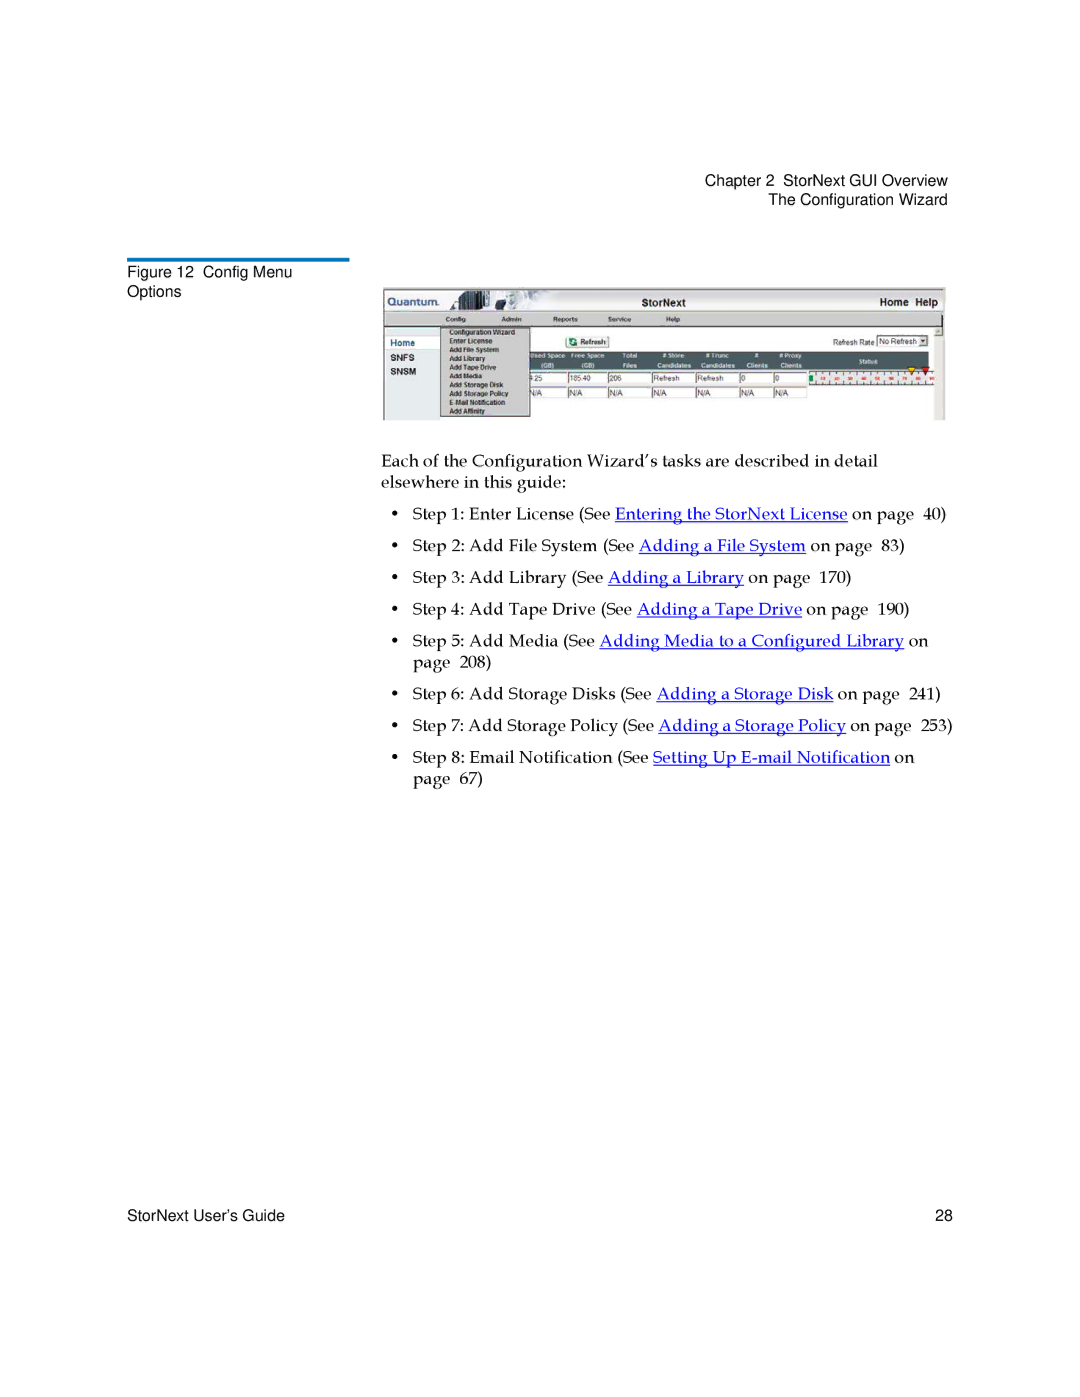 Quantum 3.5.1 manual Add Media See Adding Media to a Configured Library on 